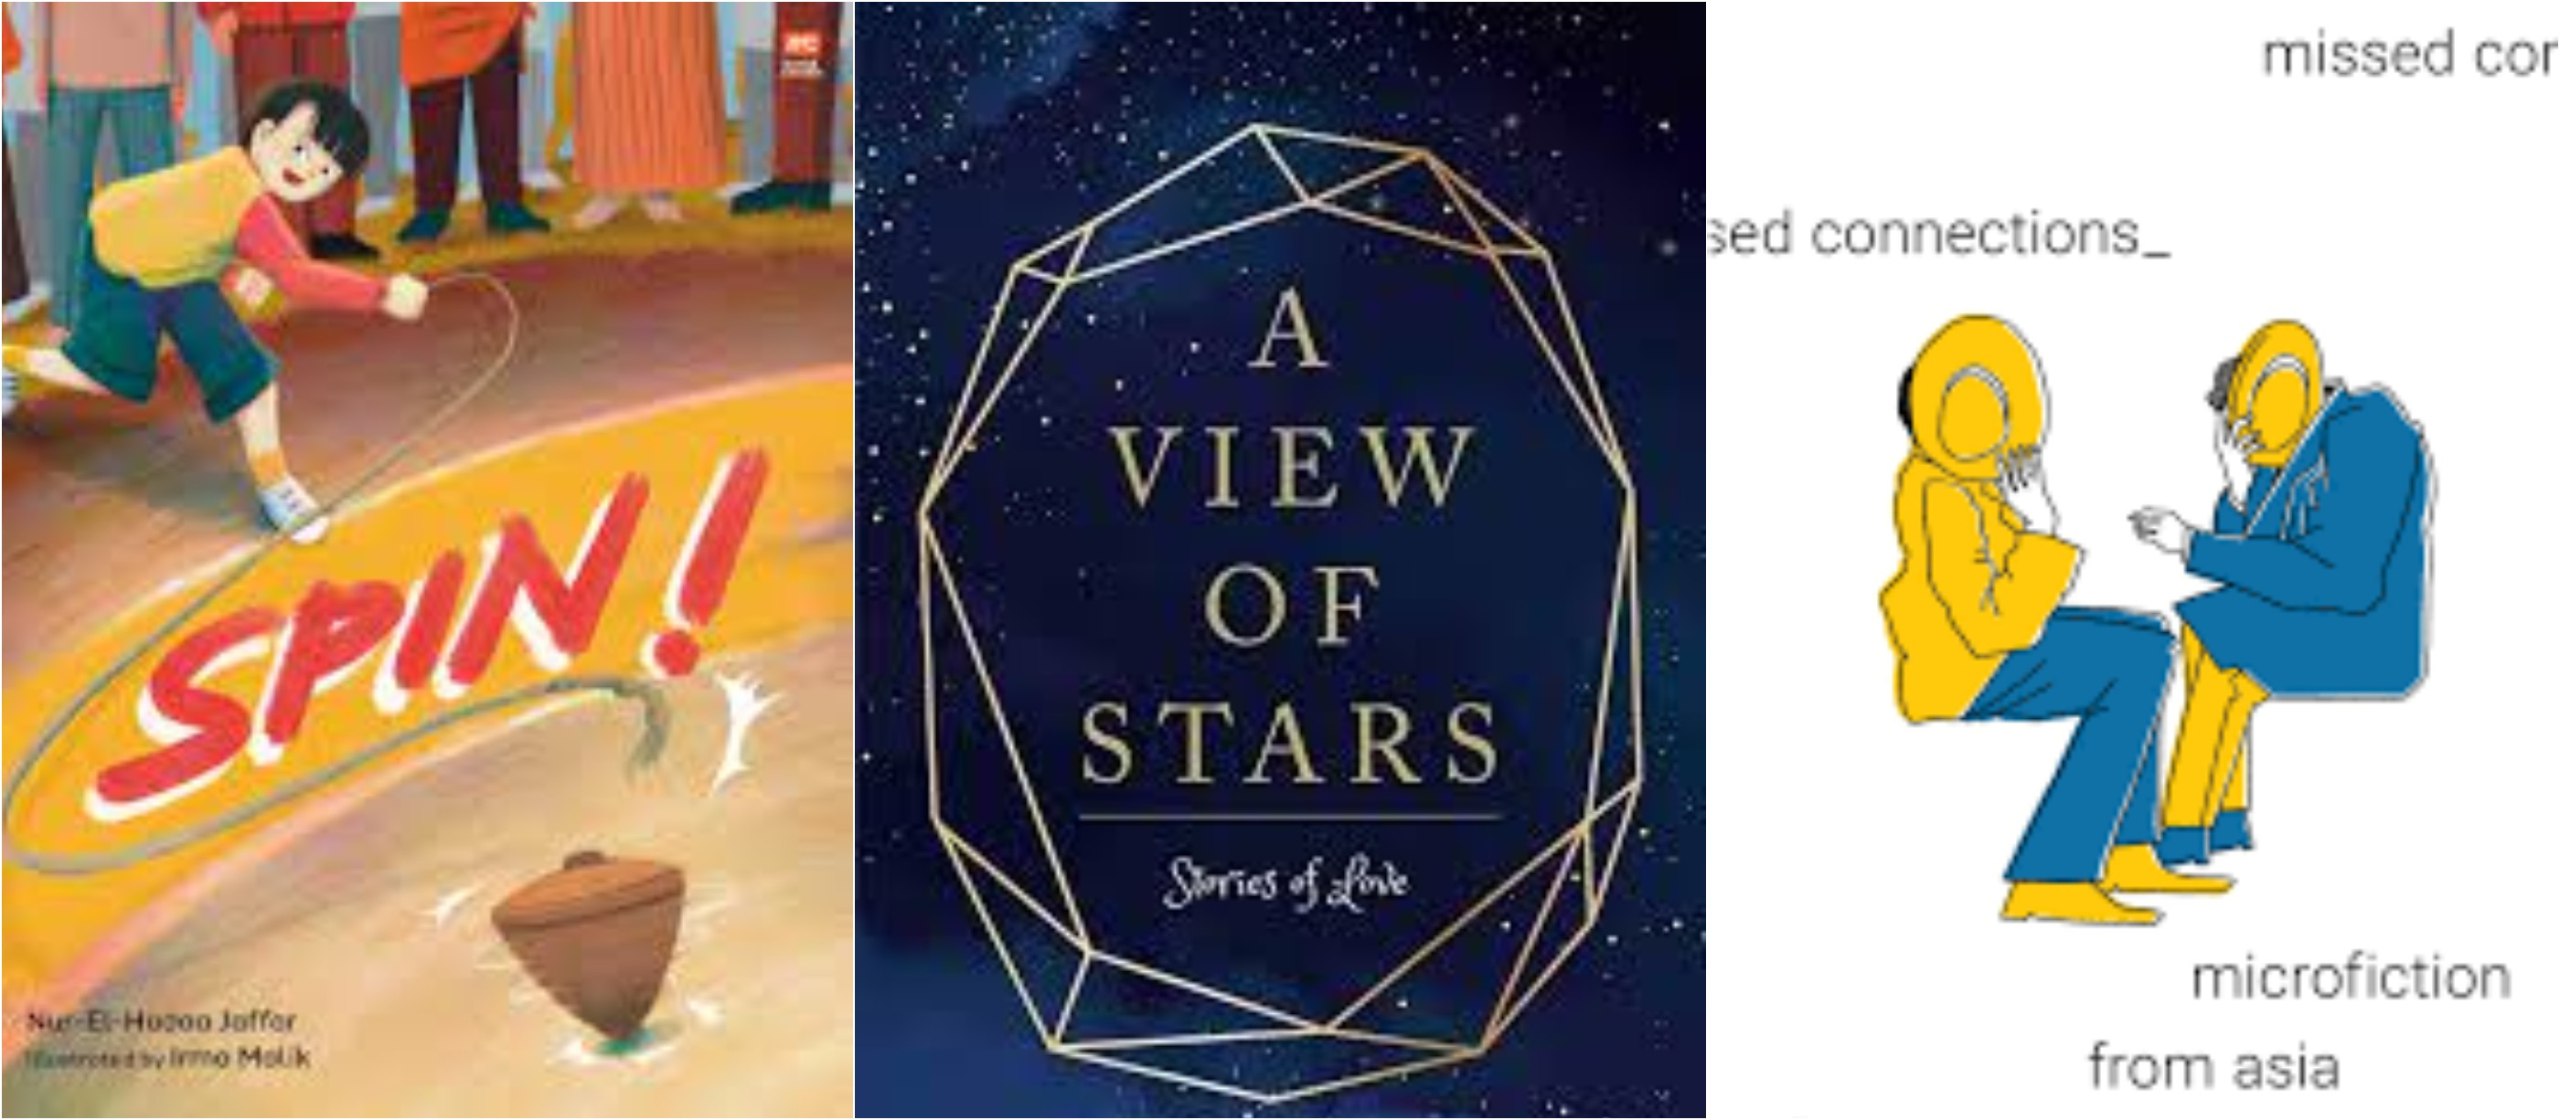 Collage of Spin!, A View Of Stars: Stories Of Love, and Missed Connections: Microfiction From Asia (left to right)